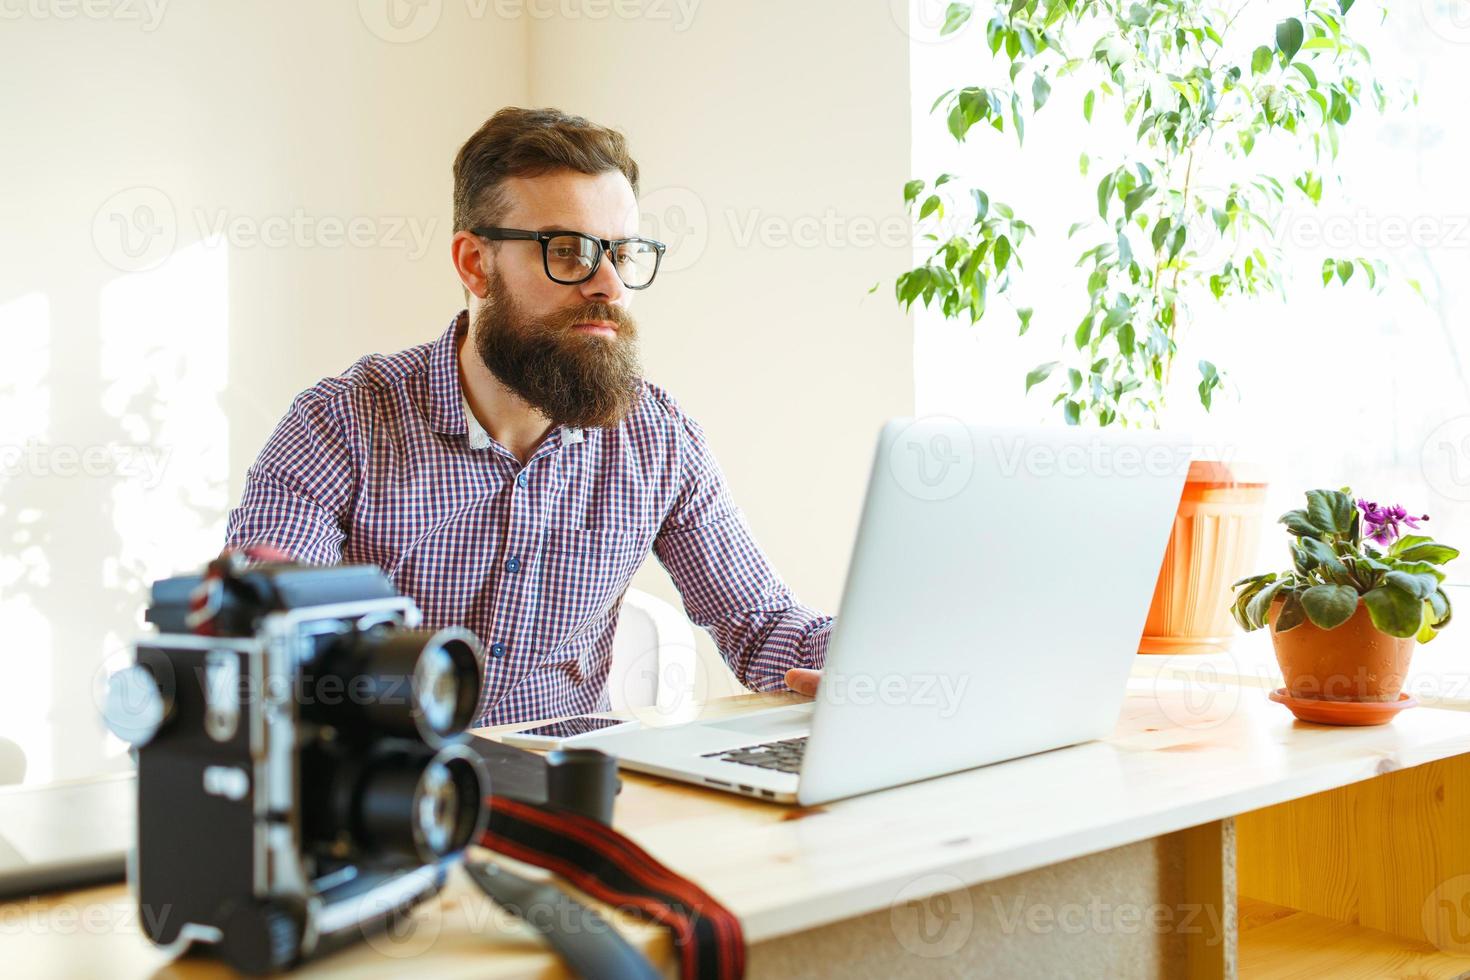 Beard young man working from home photo